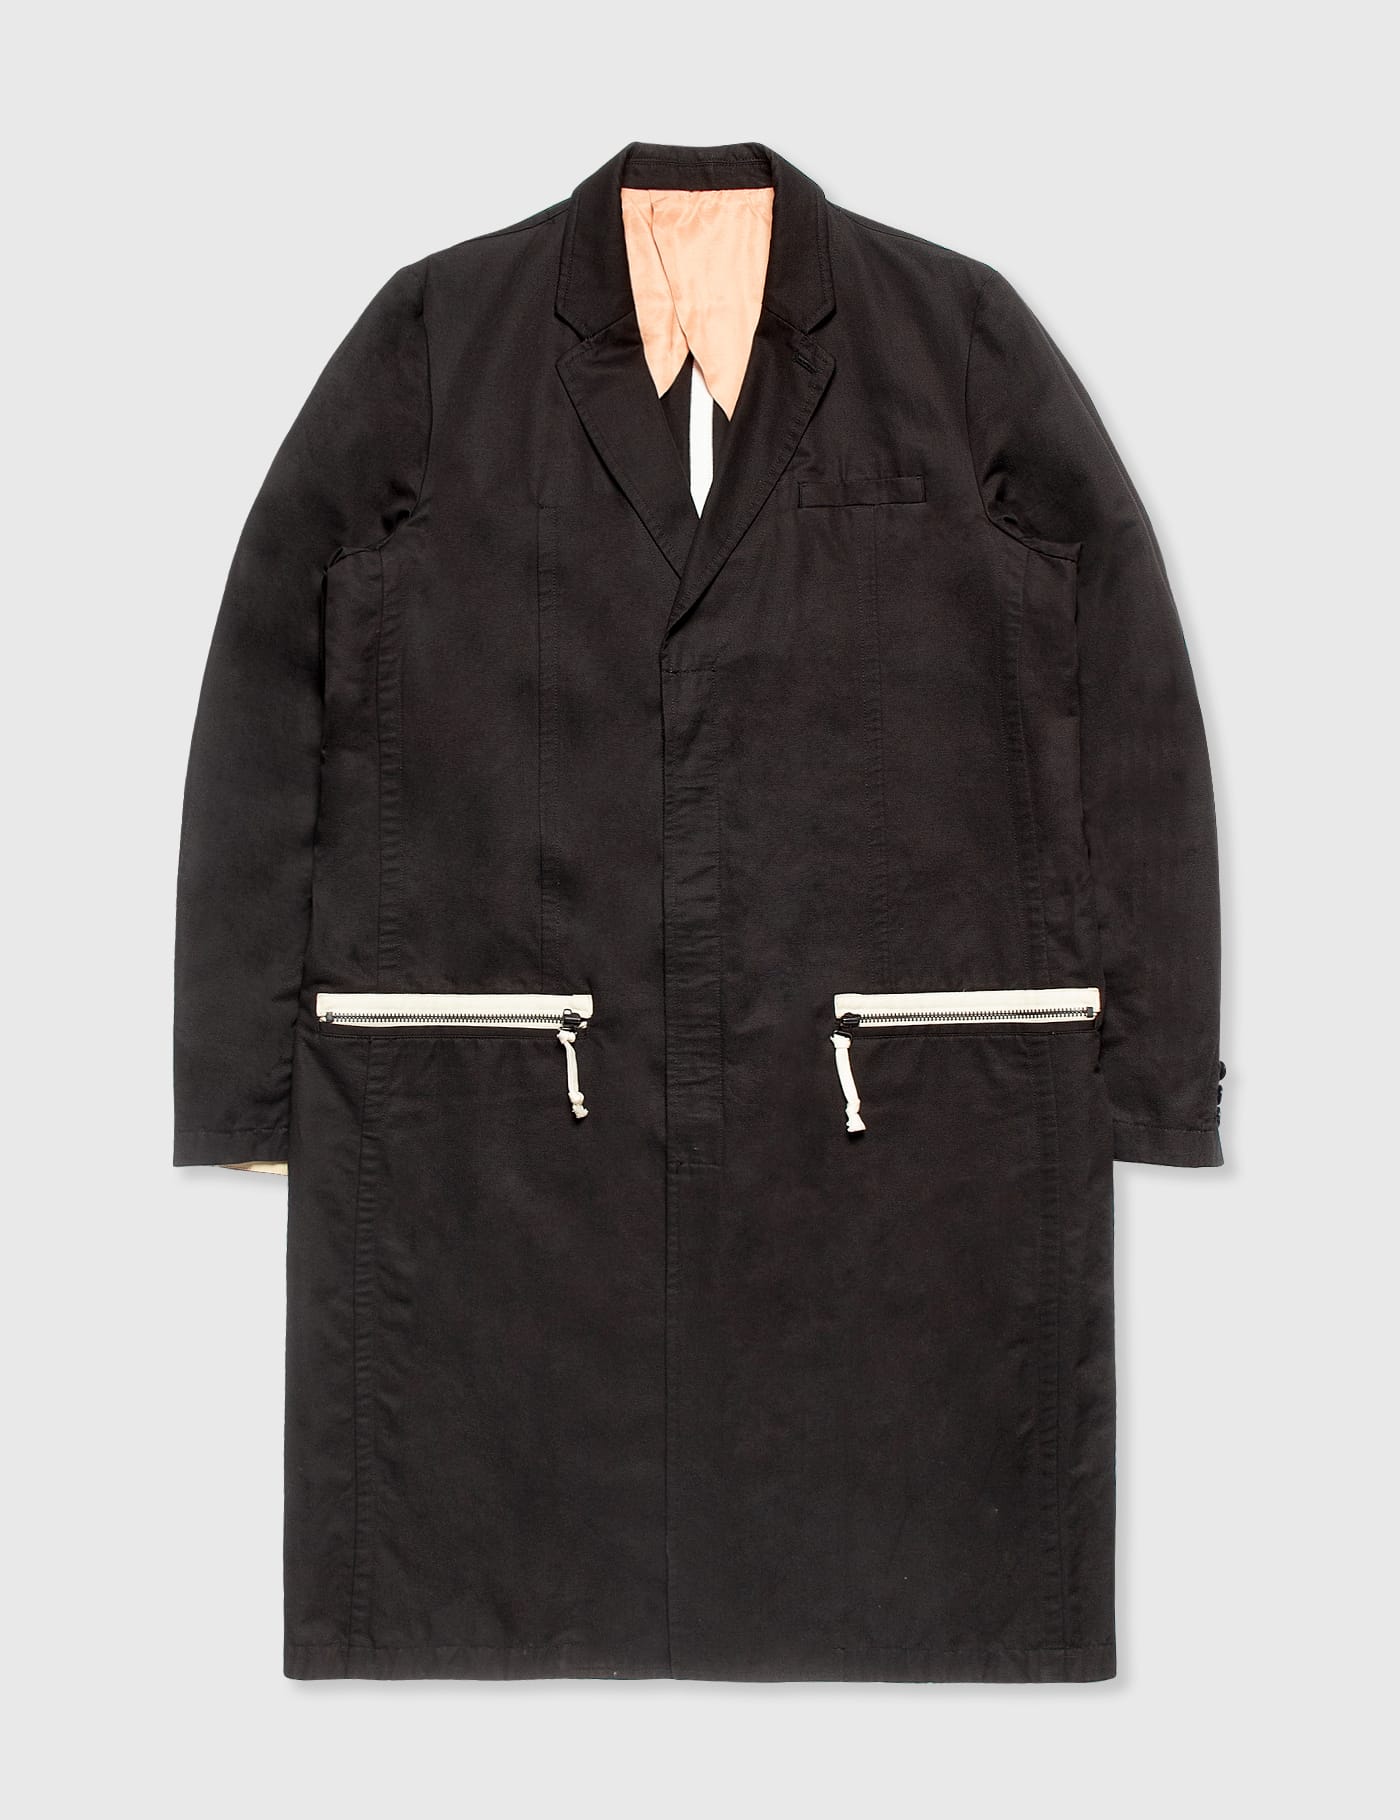 Undercover - Undercover Long Coat | HBX - Globally Curated